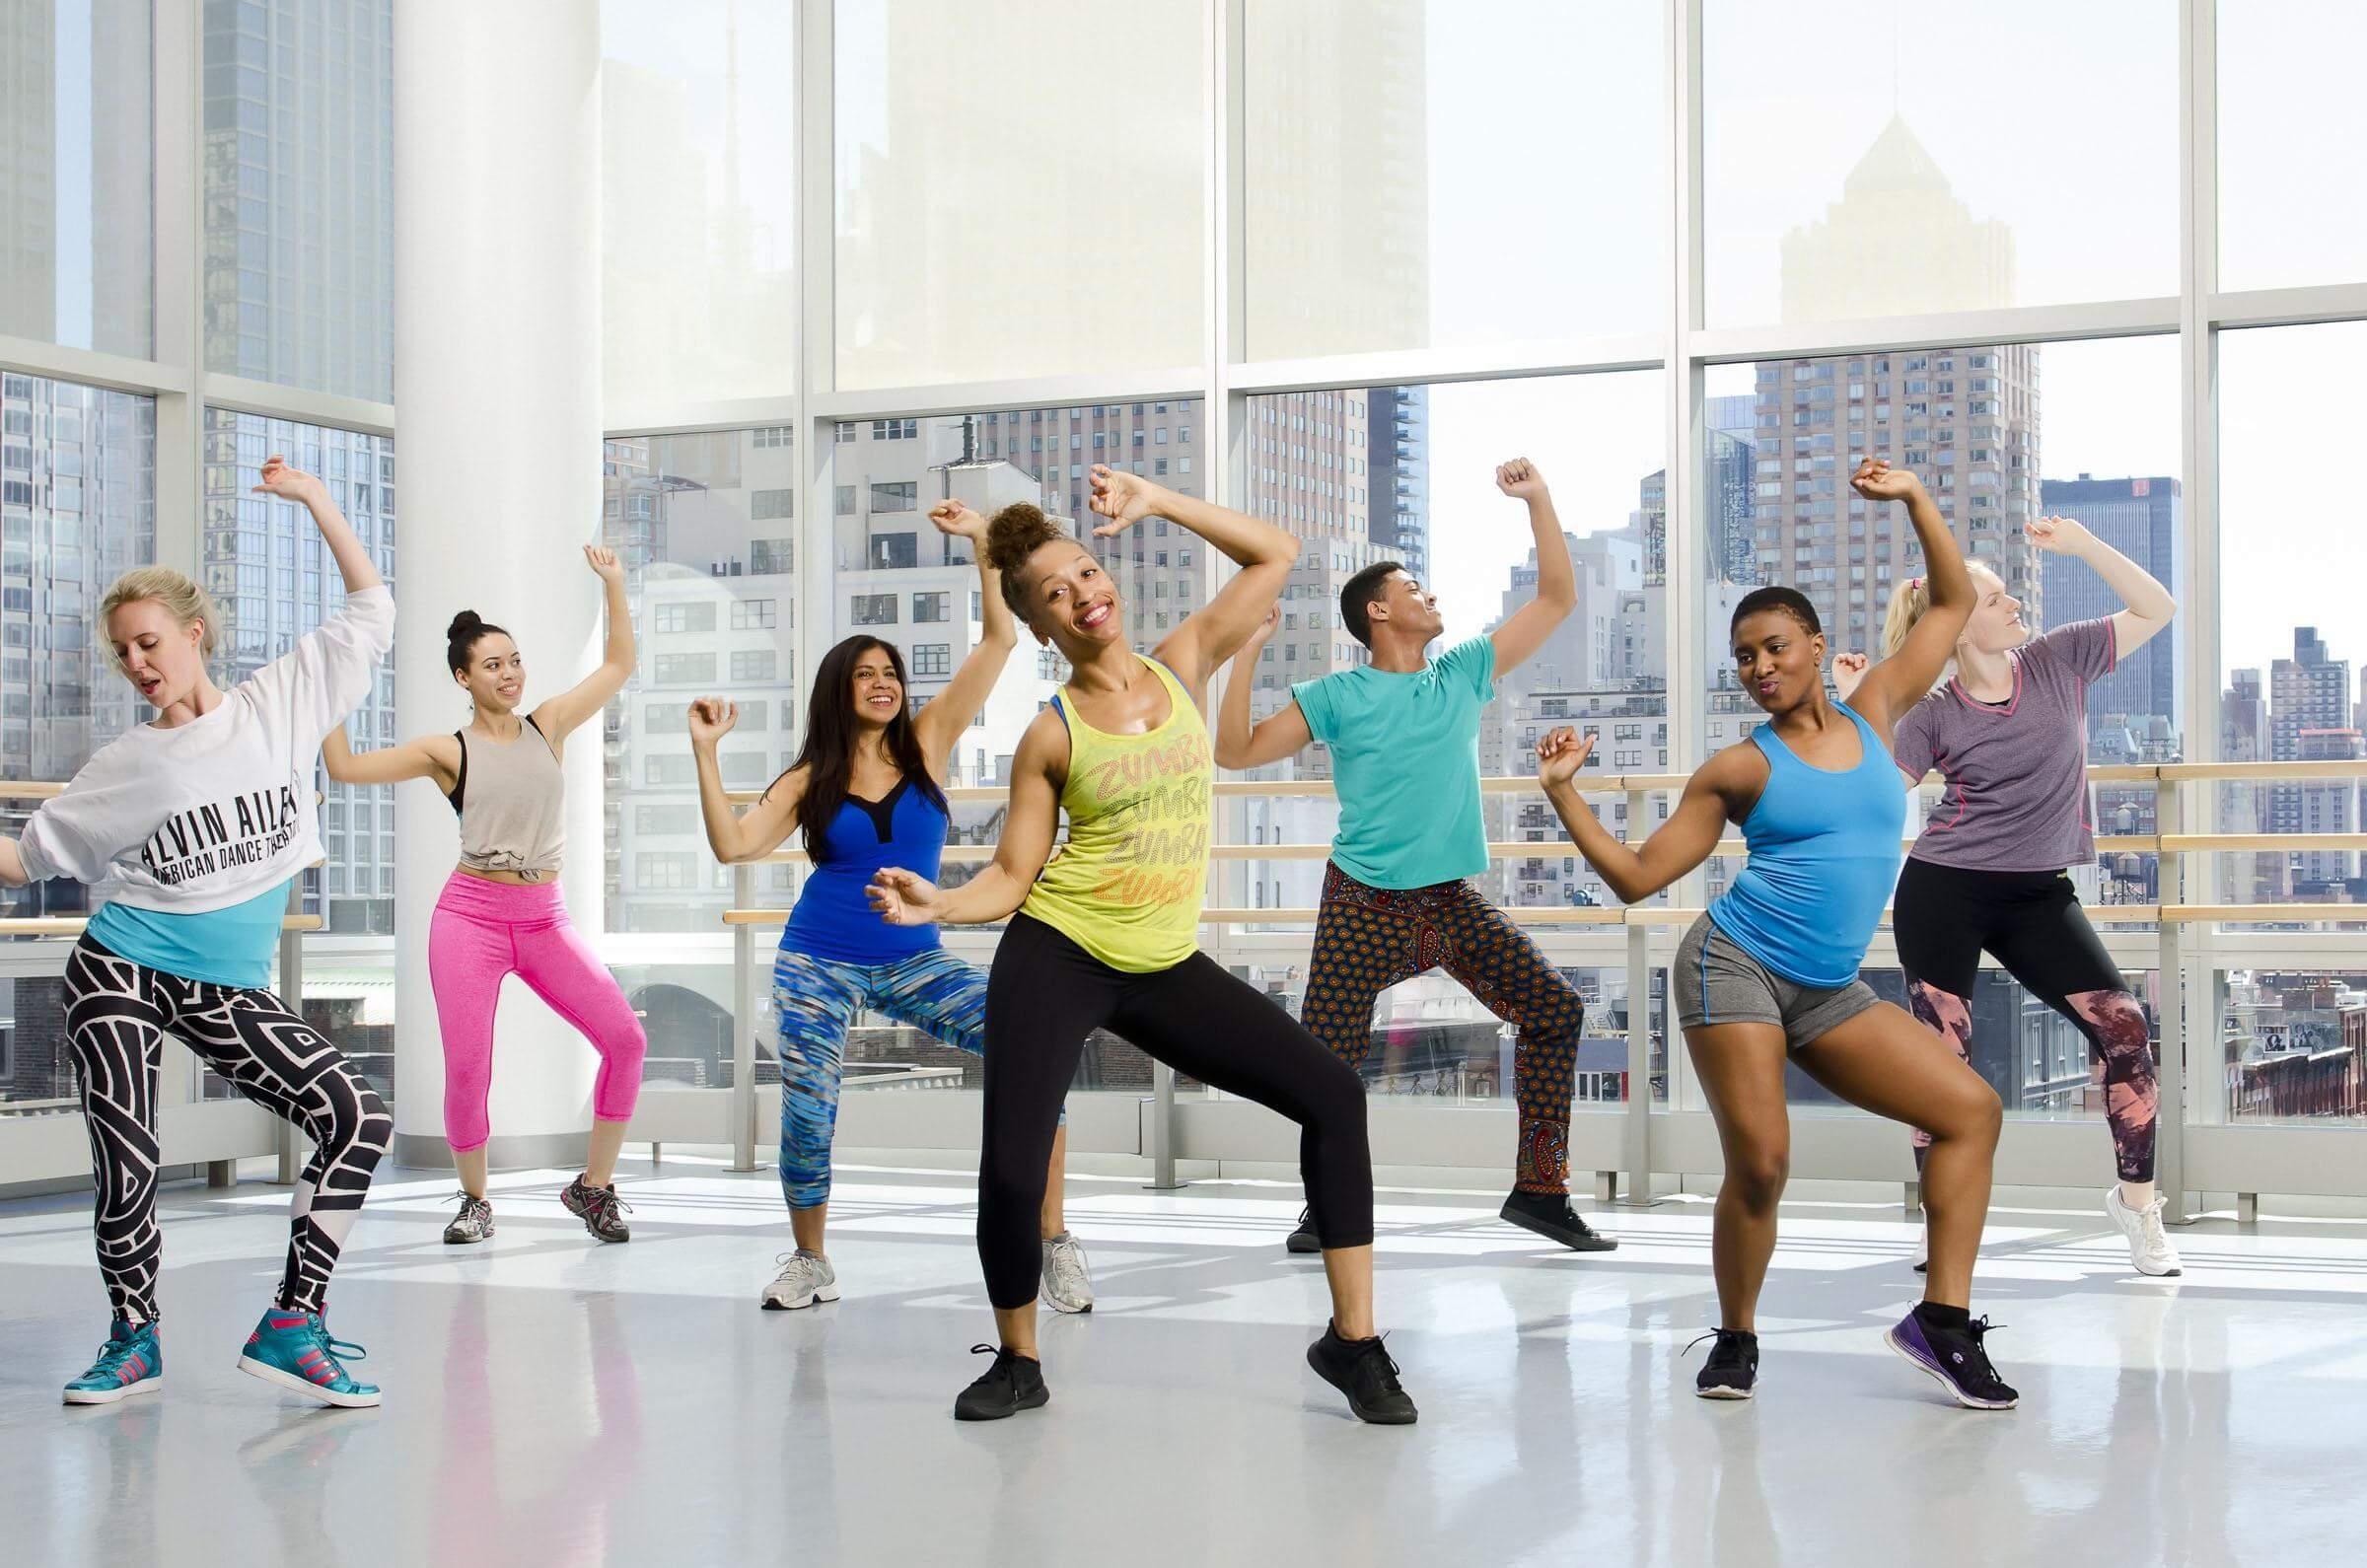 Staying toned from home? Here are the best online Zumba classes ever